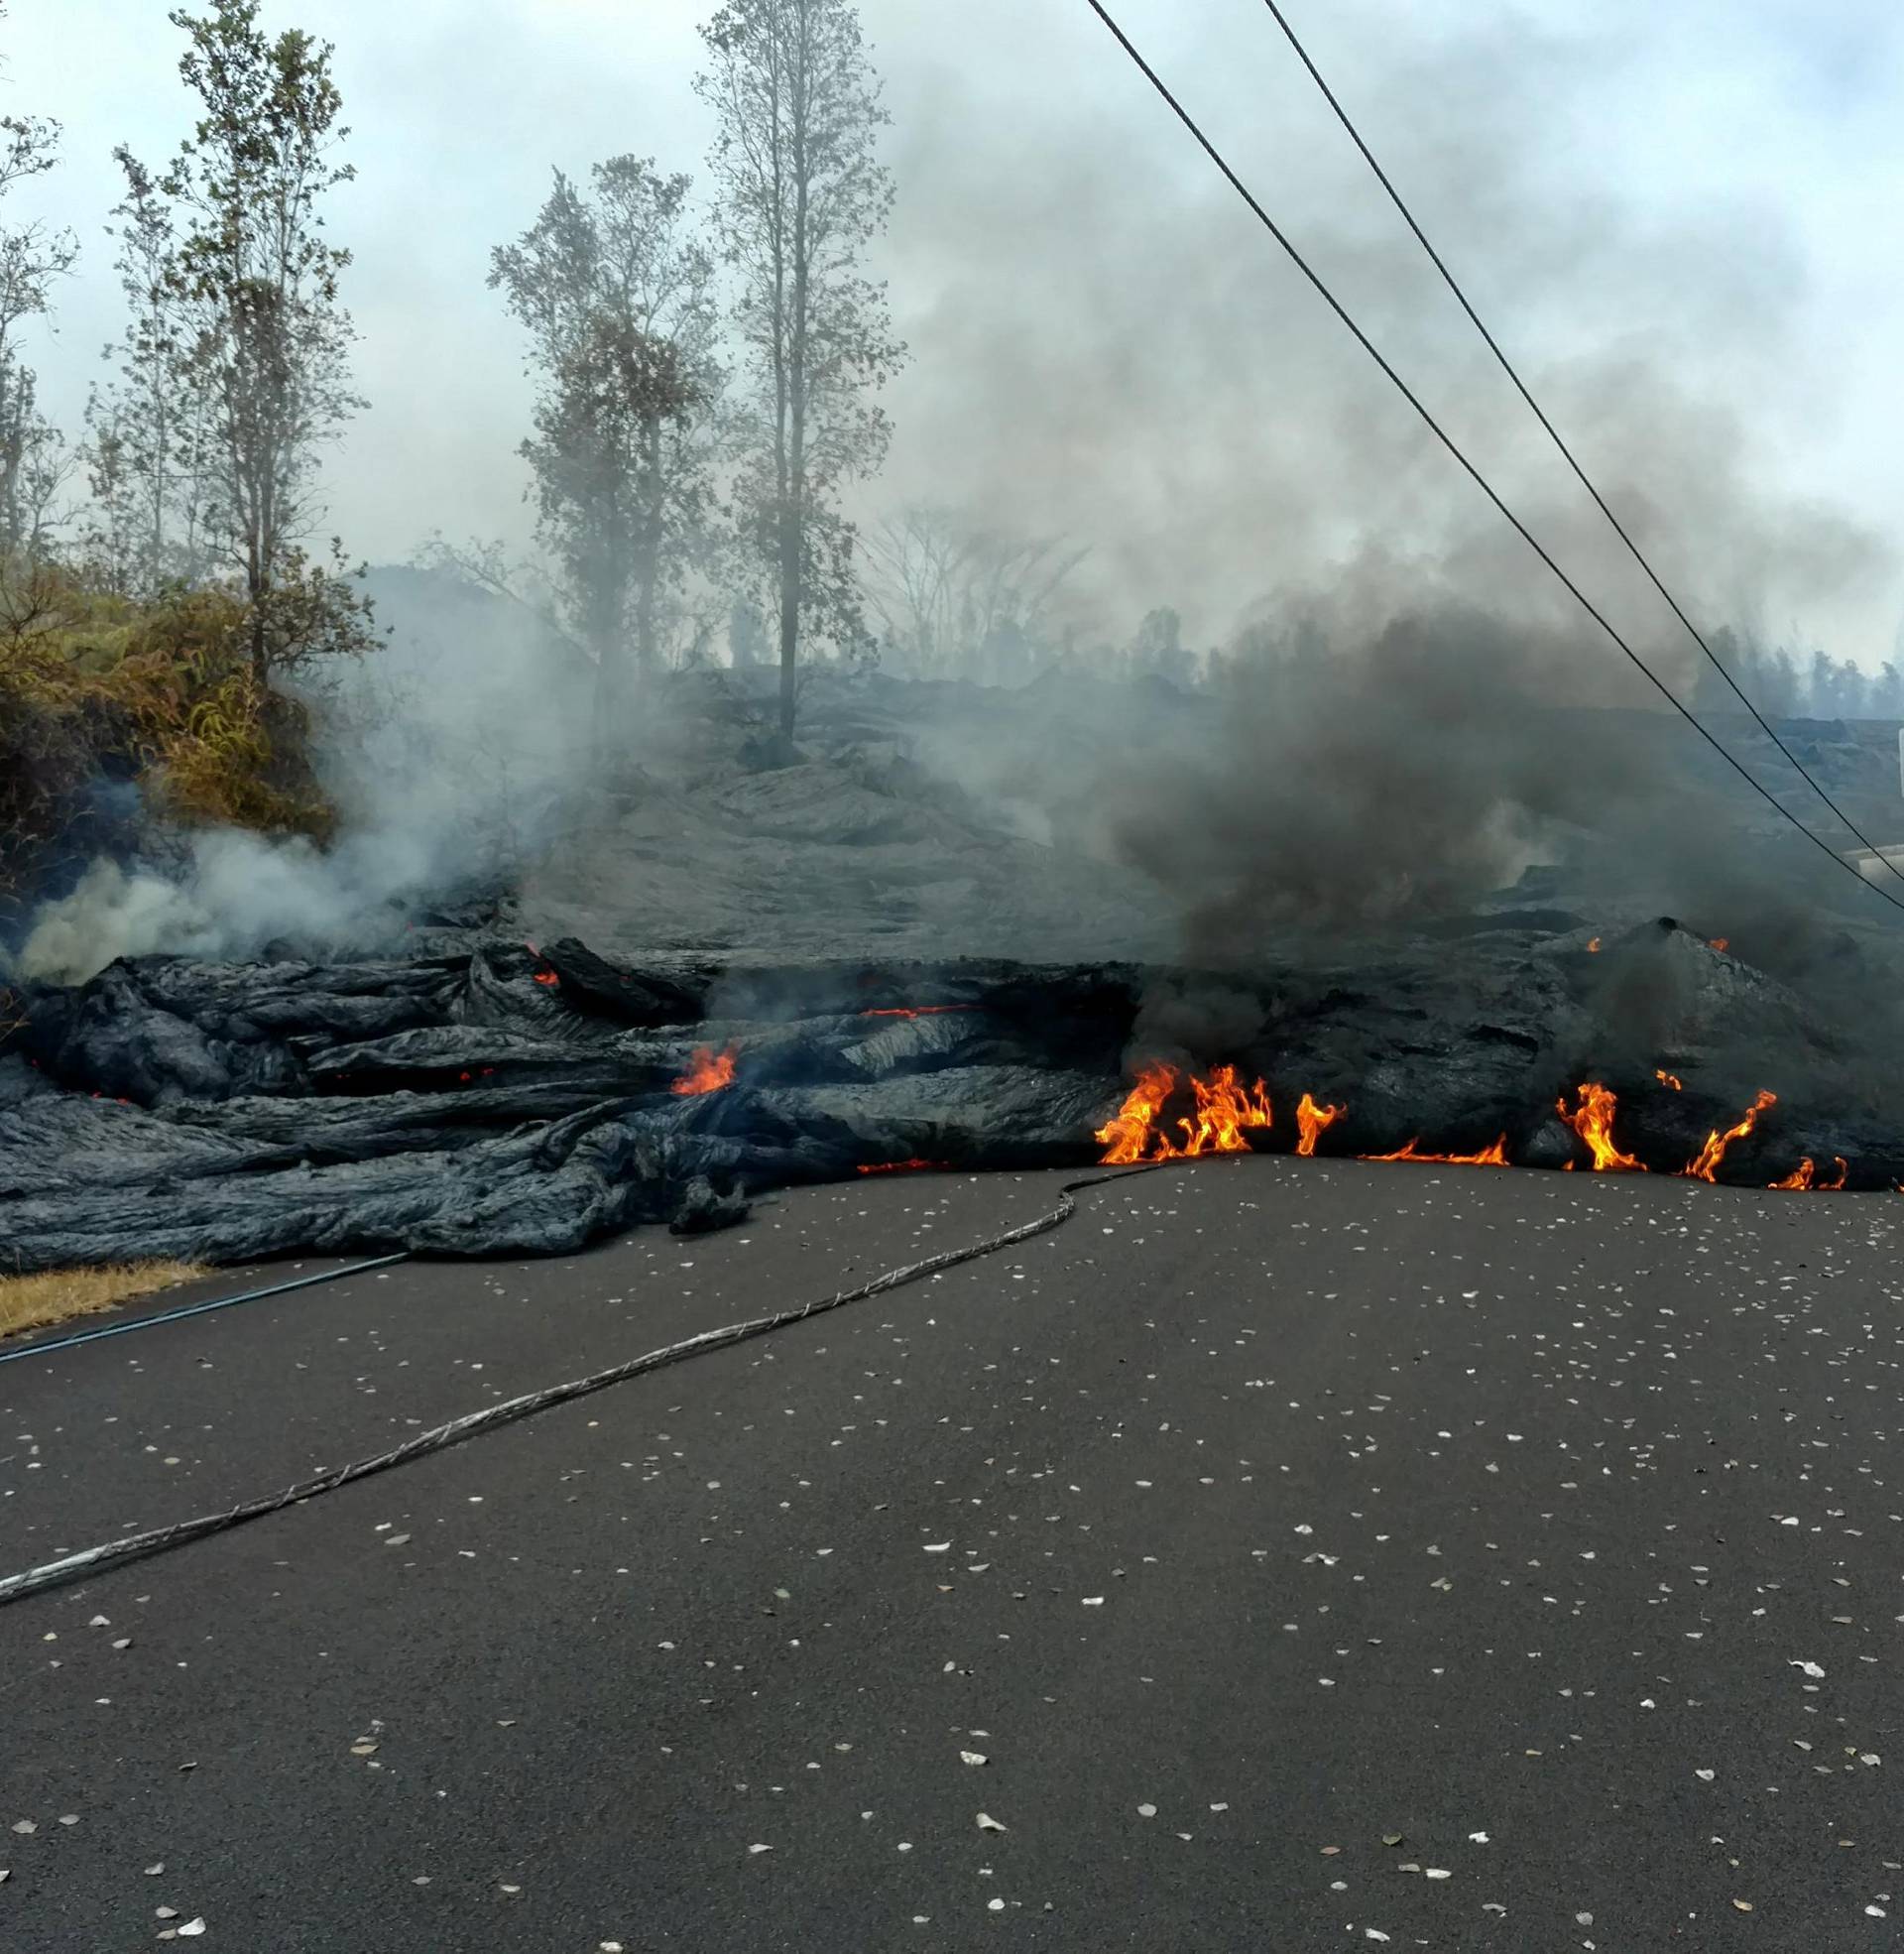 A lava flow is seen on a road in Pahoa